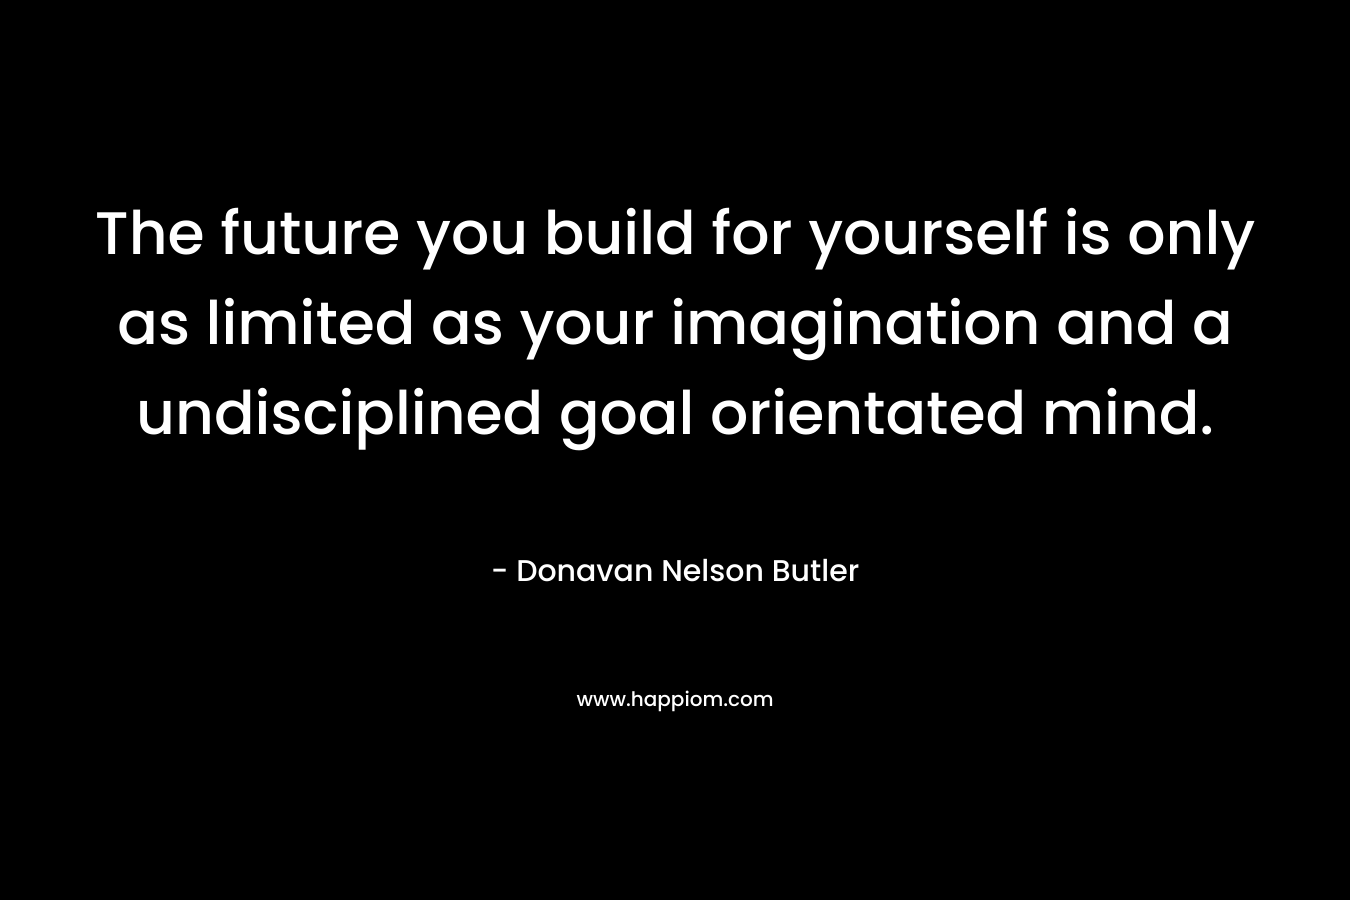 The future you build for yourself is only as limited as your imagination and a undisciplined goal orientated mind. – Donavan Nelson Butler